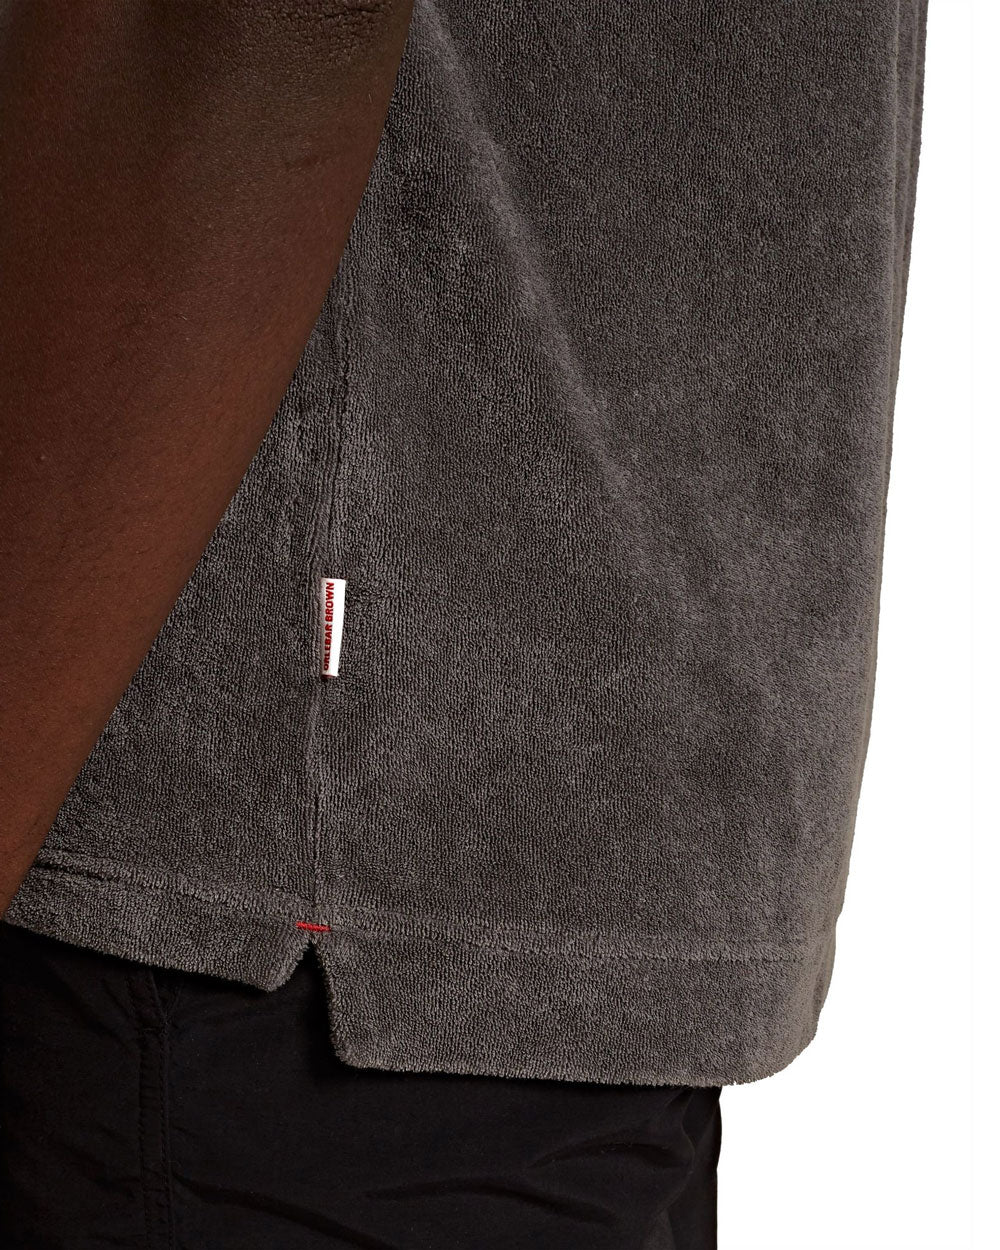 Terry Toweling Resort Polo Shirt in Storm Grey